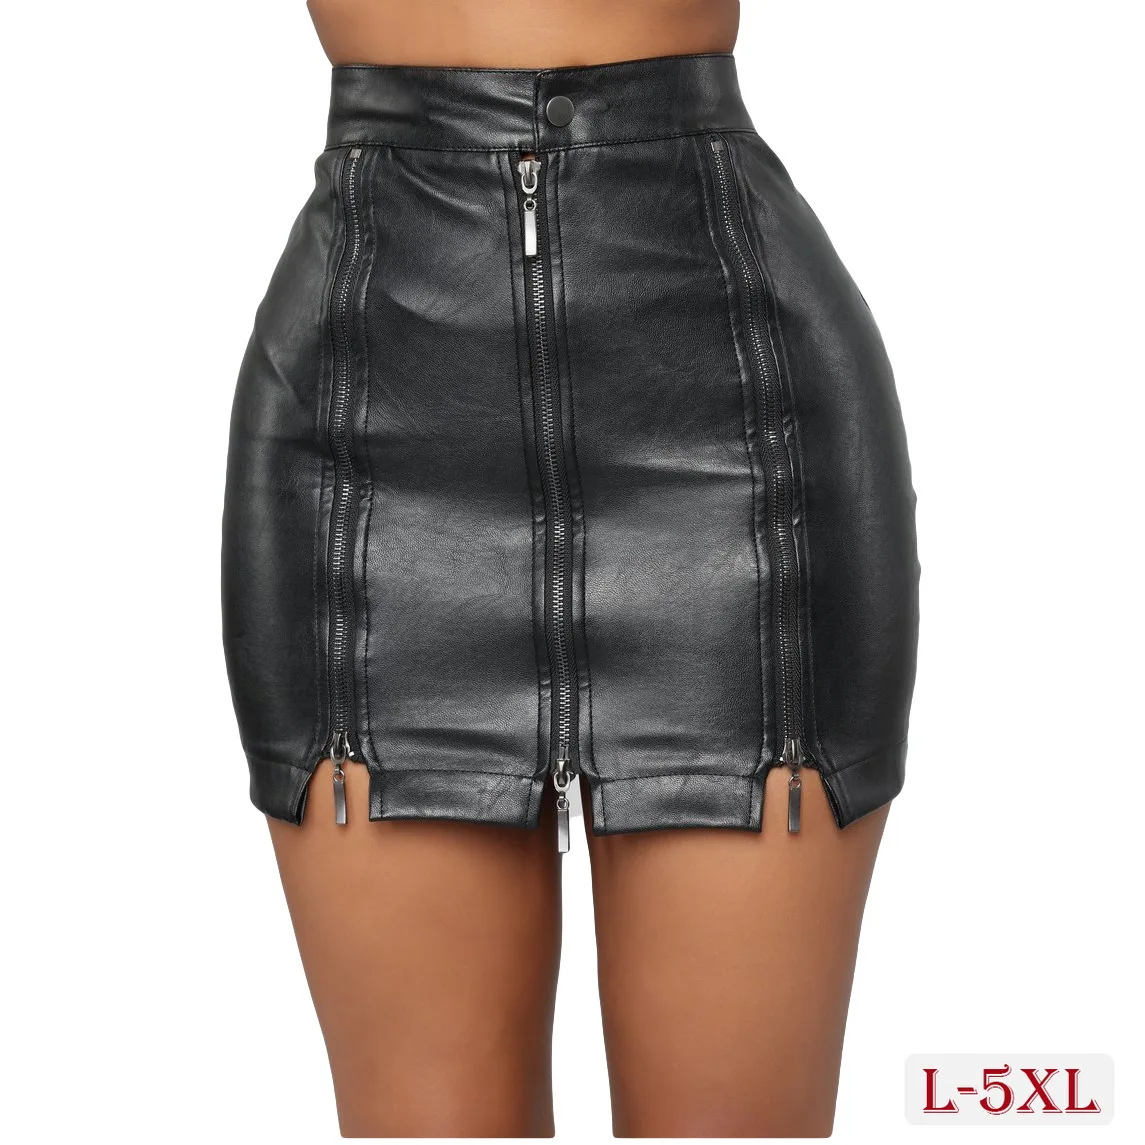 aman al masri recommends Sex In Leather Skirt